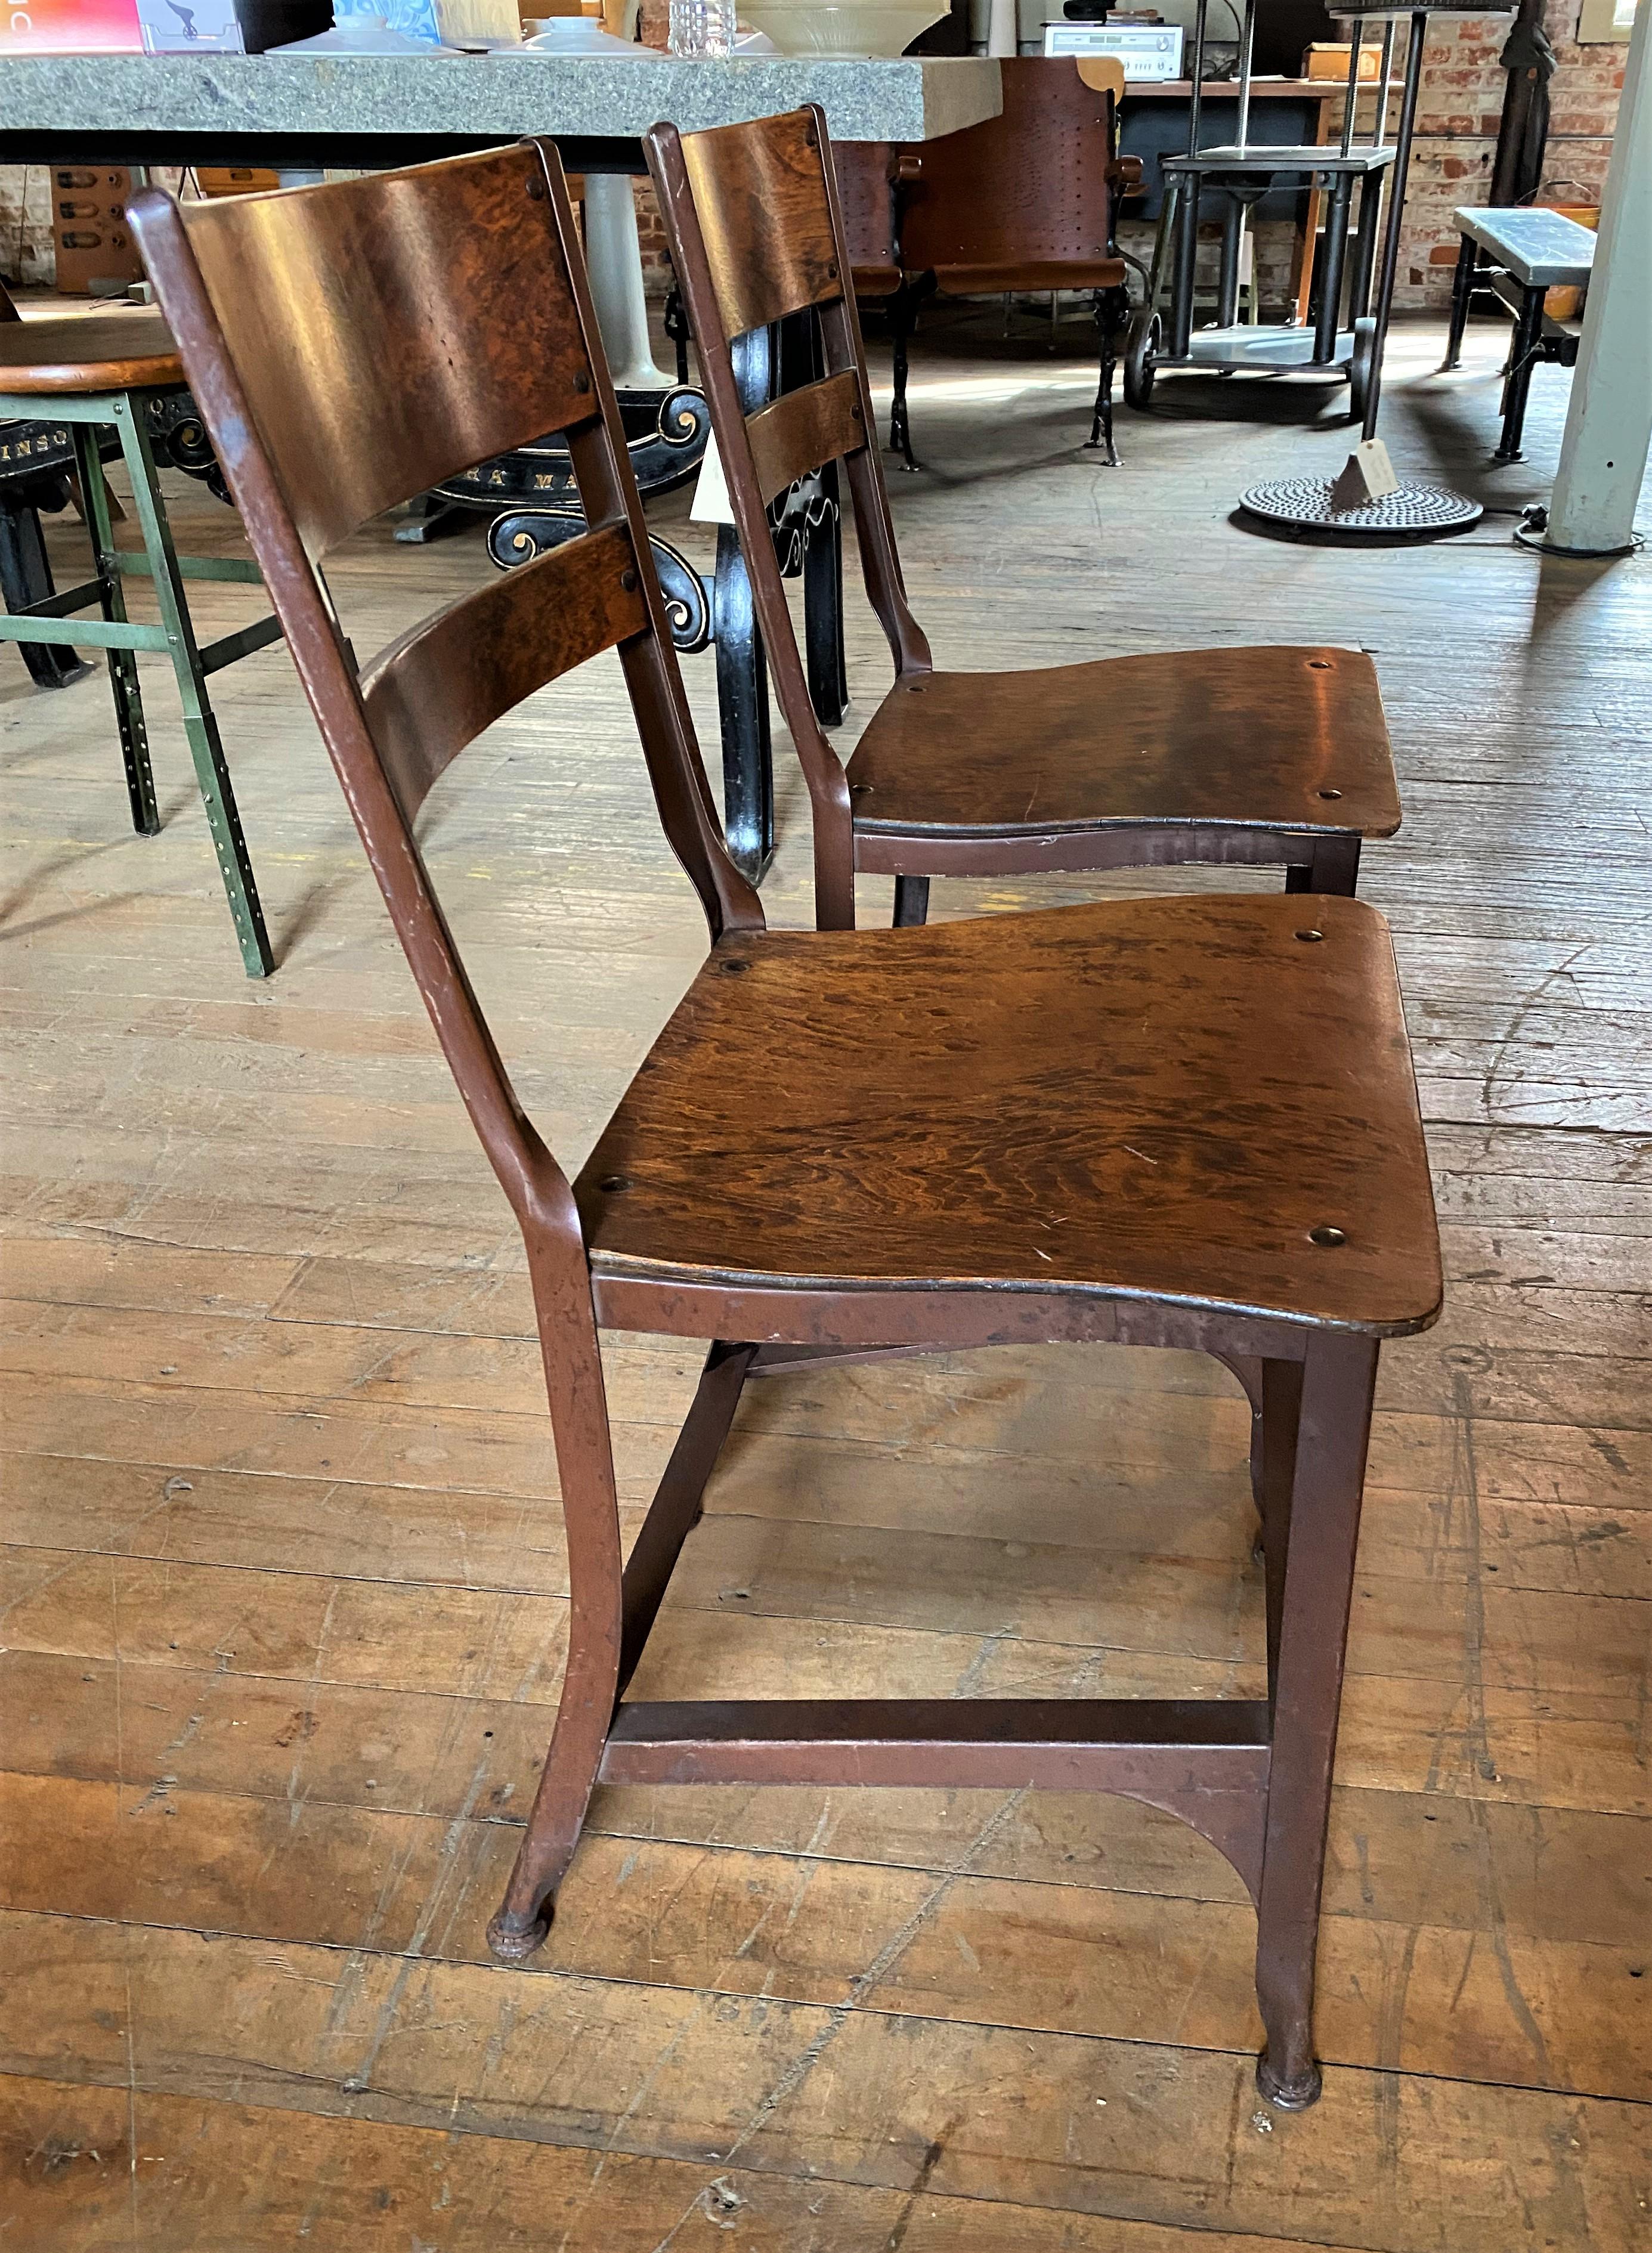 One Pair of Original Toledo chairs

Overall Dimensions: 15 1/2